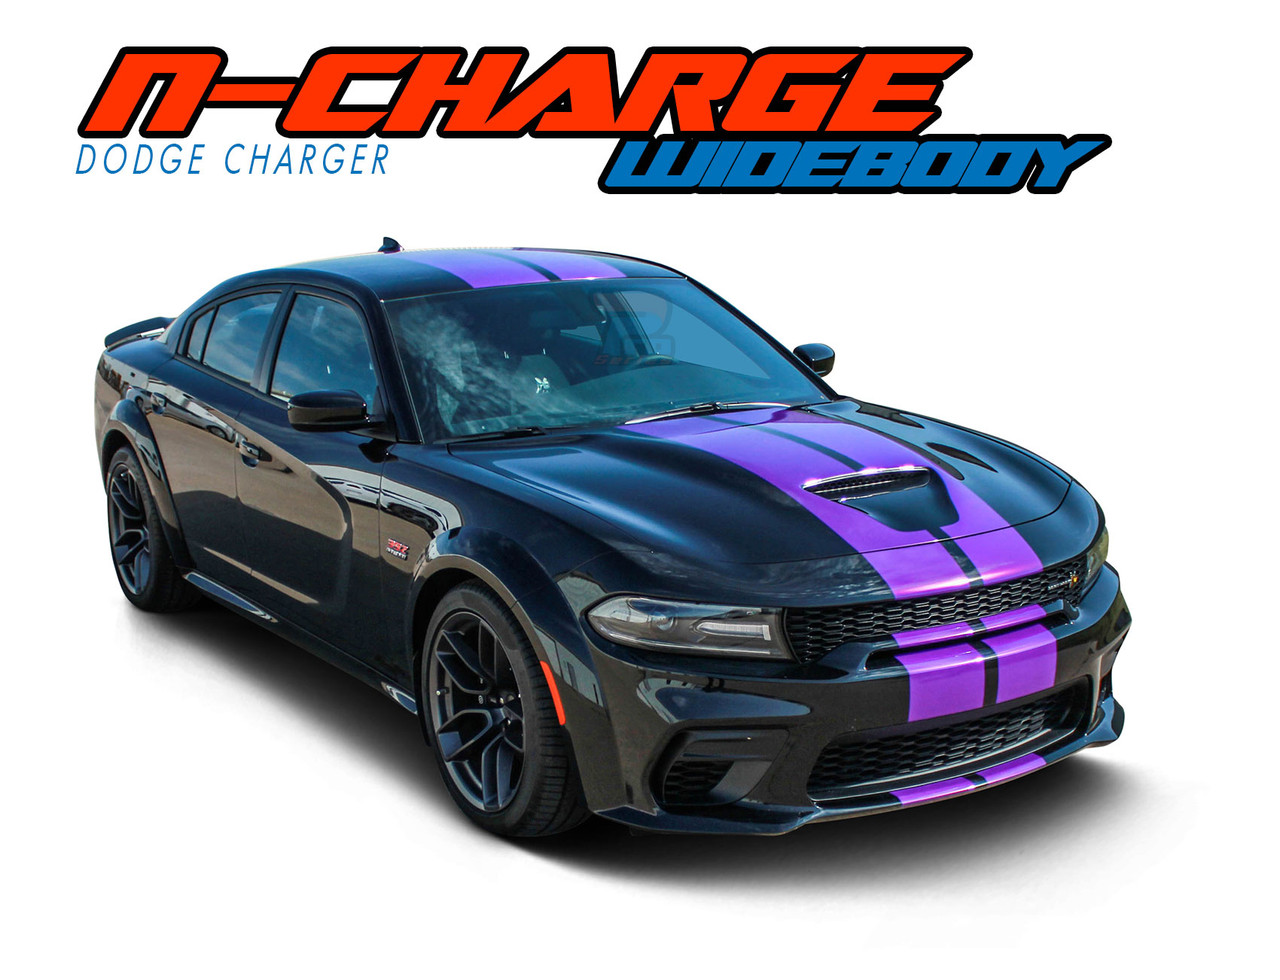 N-CHARGE RALLY WIDEBODY | Dodge Charger Racing Stripes | Charger Decals |  Hemi Vinyl Graphics